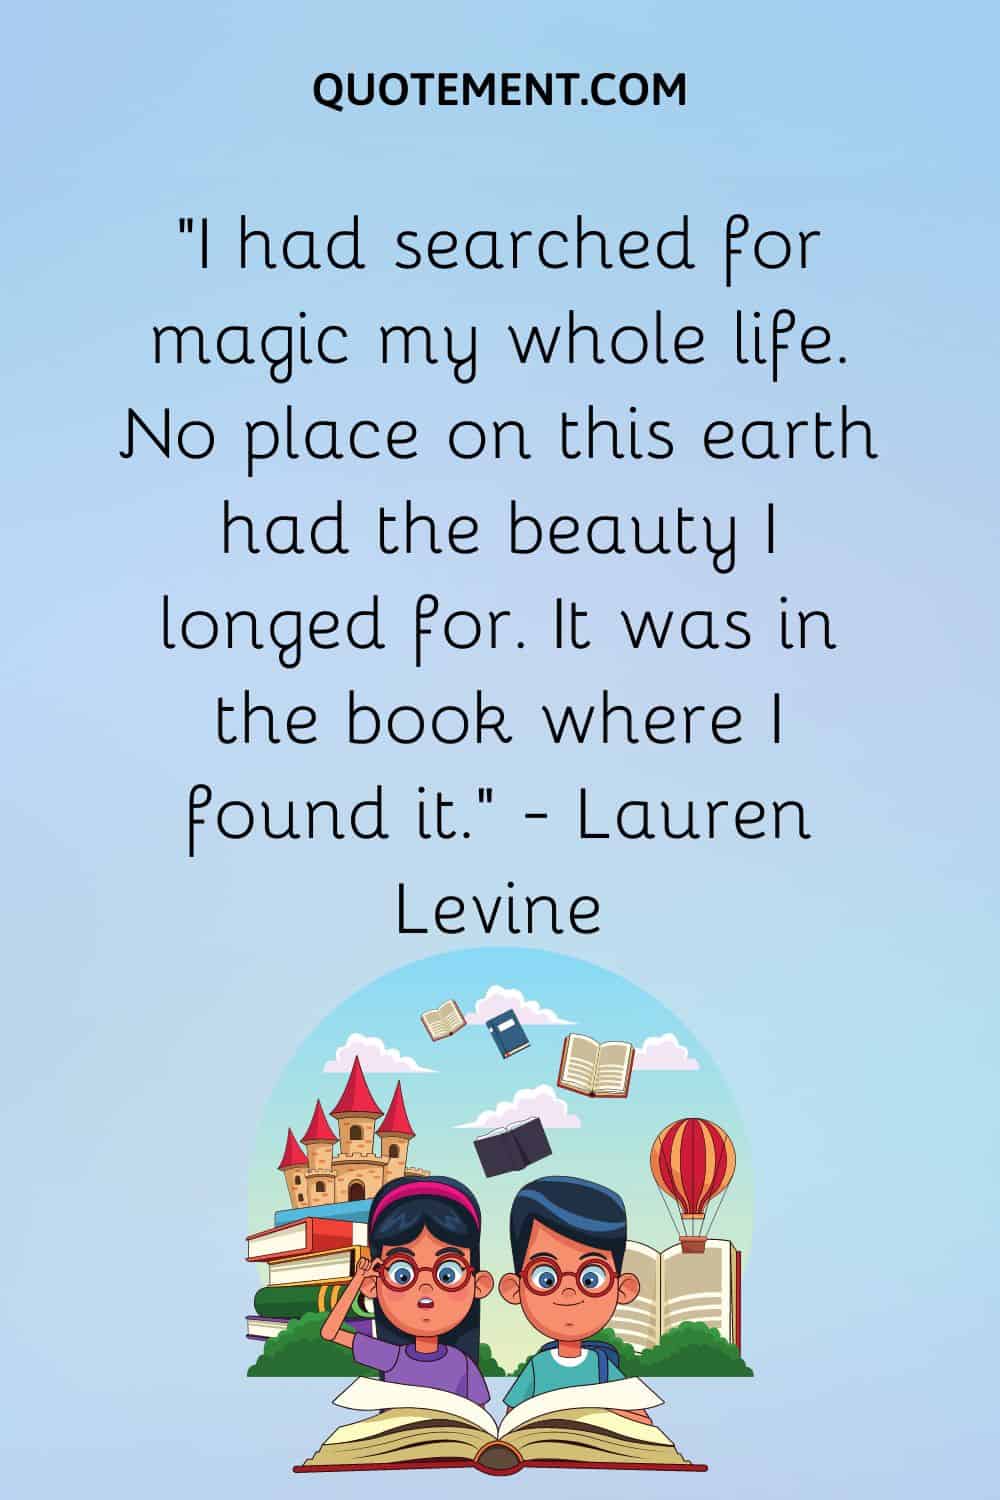 “I had searched for magic my whole life. No place on this earth had the beauty I longed for. It was in the book where I found it.” — Lauren Levine